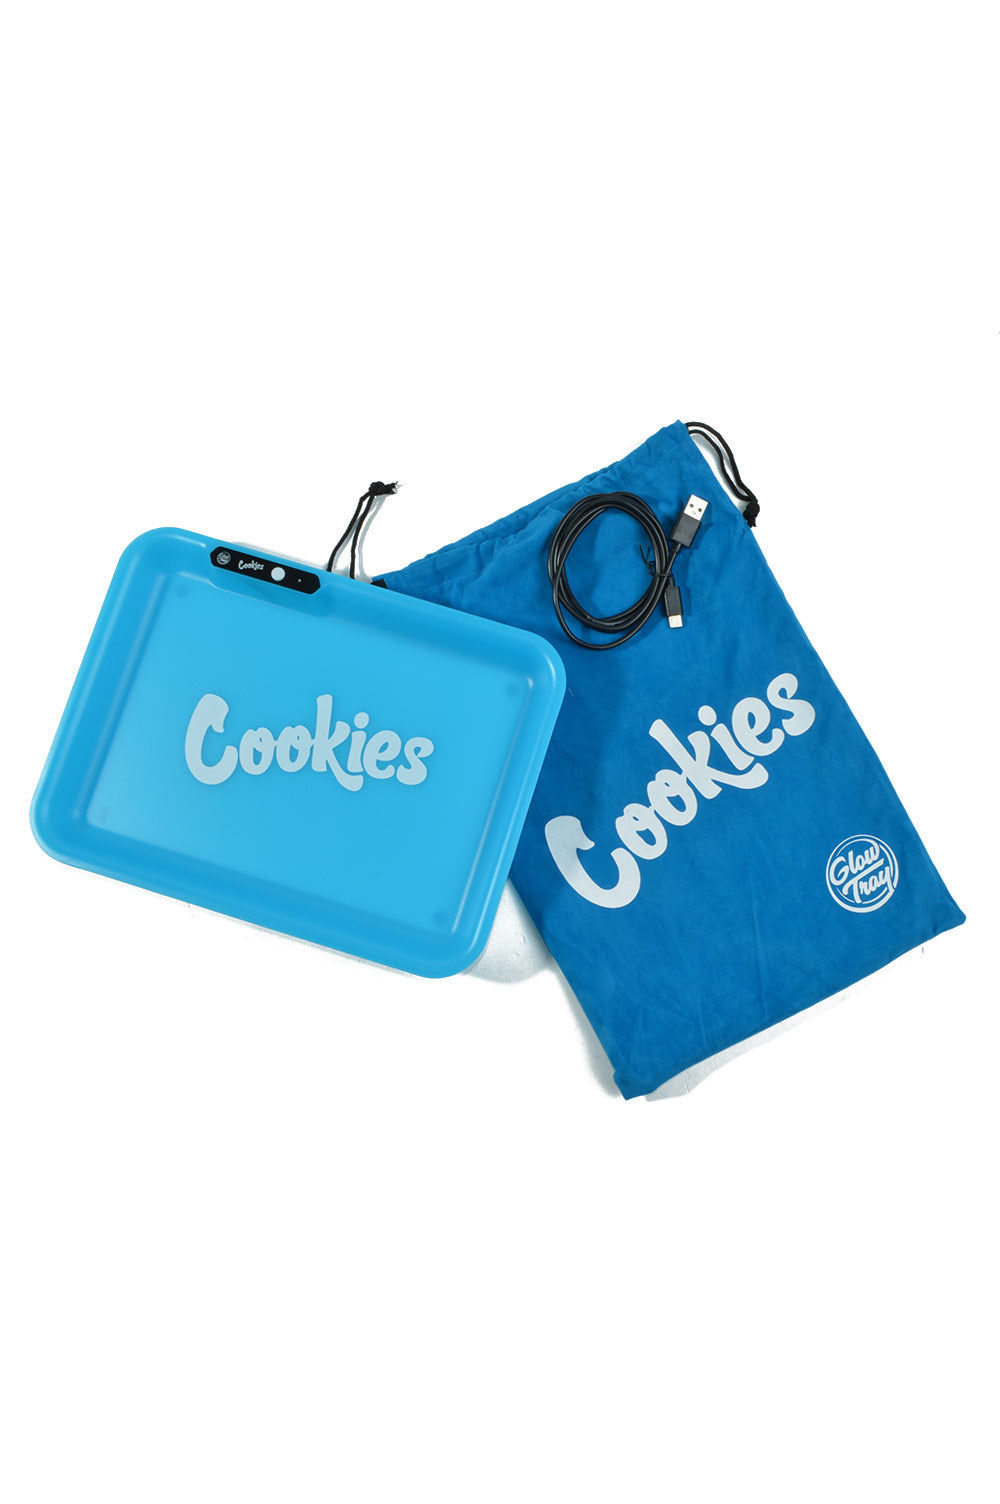 Glow Tray x Cookies SF LED Rolling Glow Light Up Tray Rechargeable